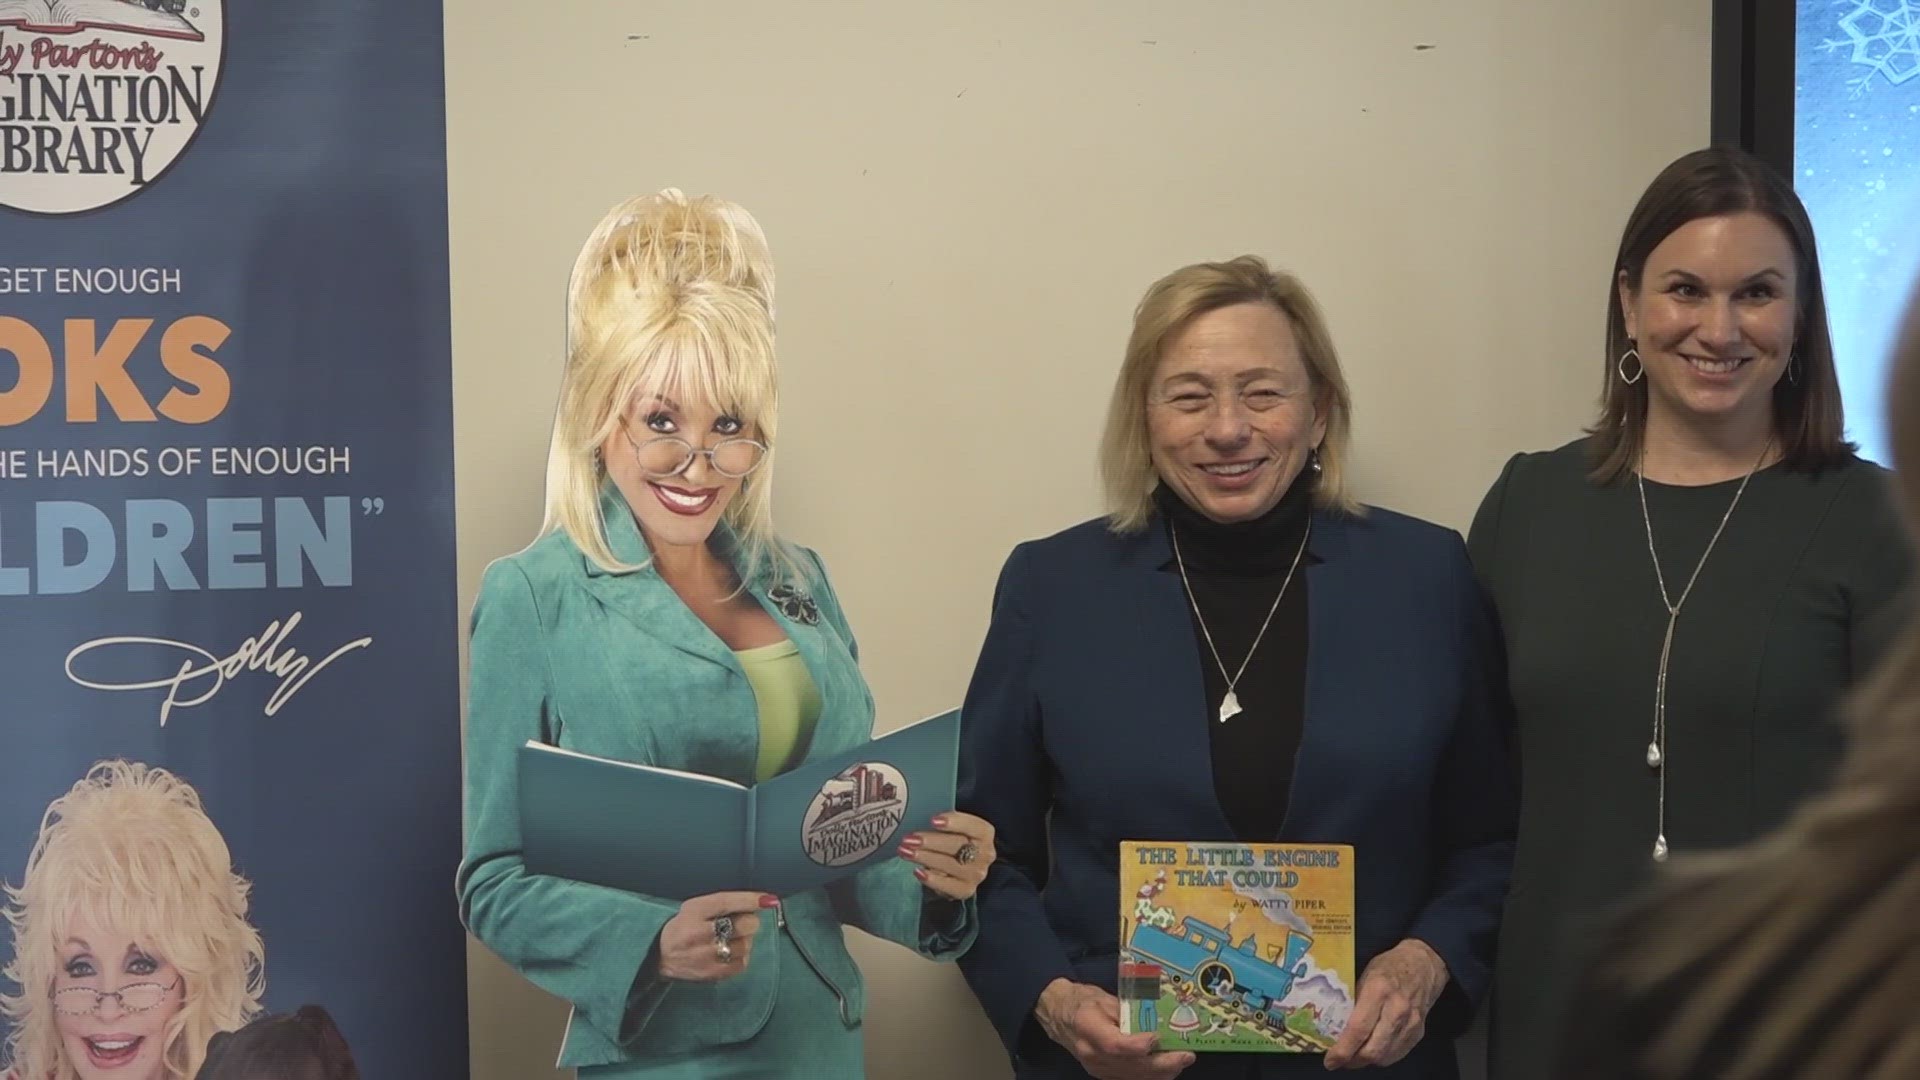 The Tennessee-born country music sensation's philanthropic project aims to get more books into the hands of children and their parents.